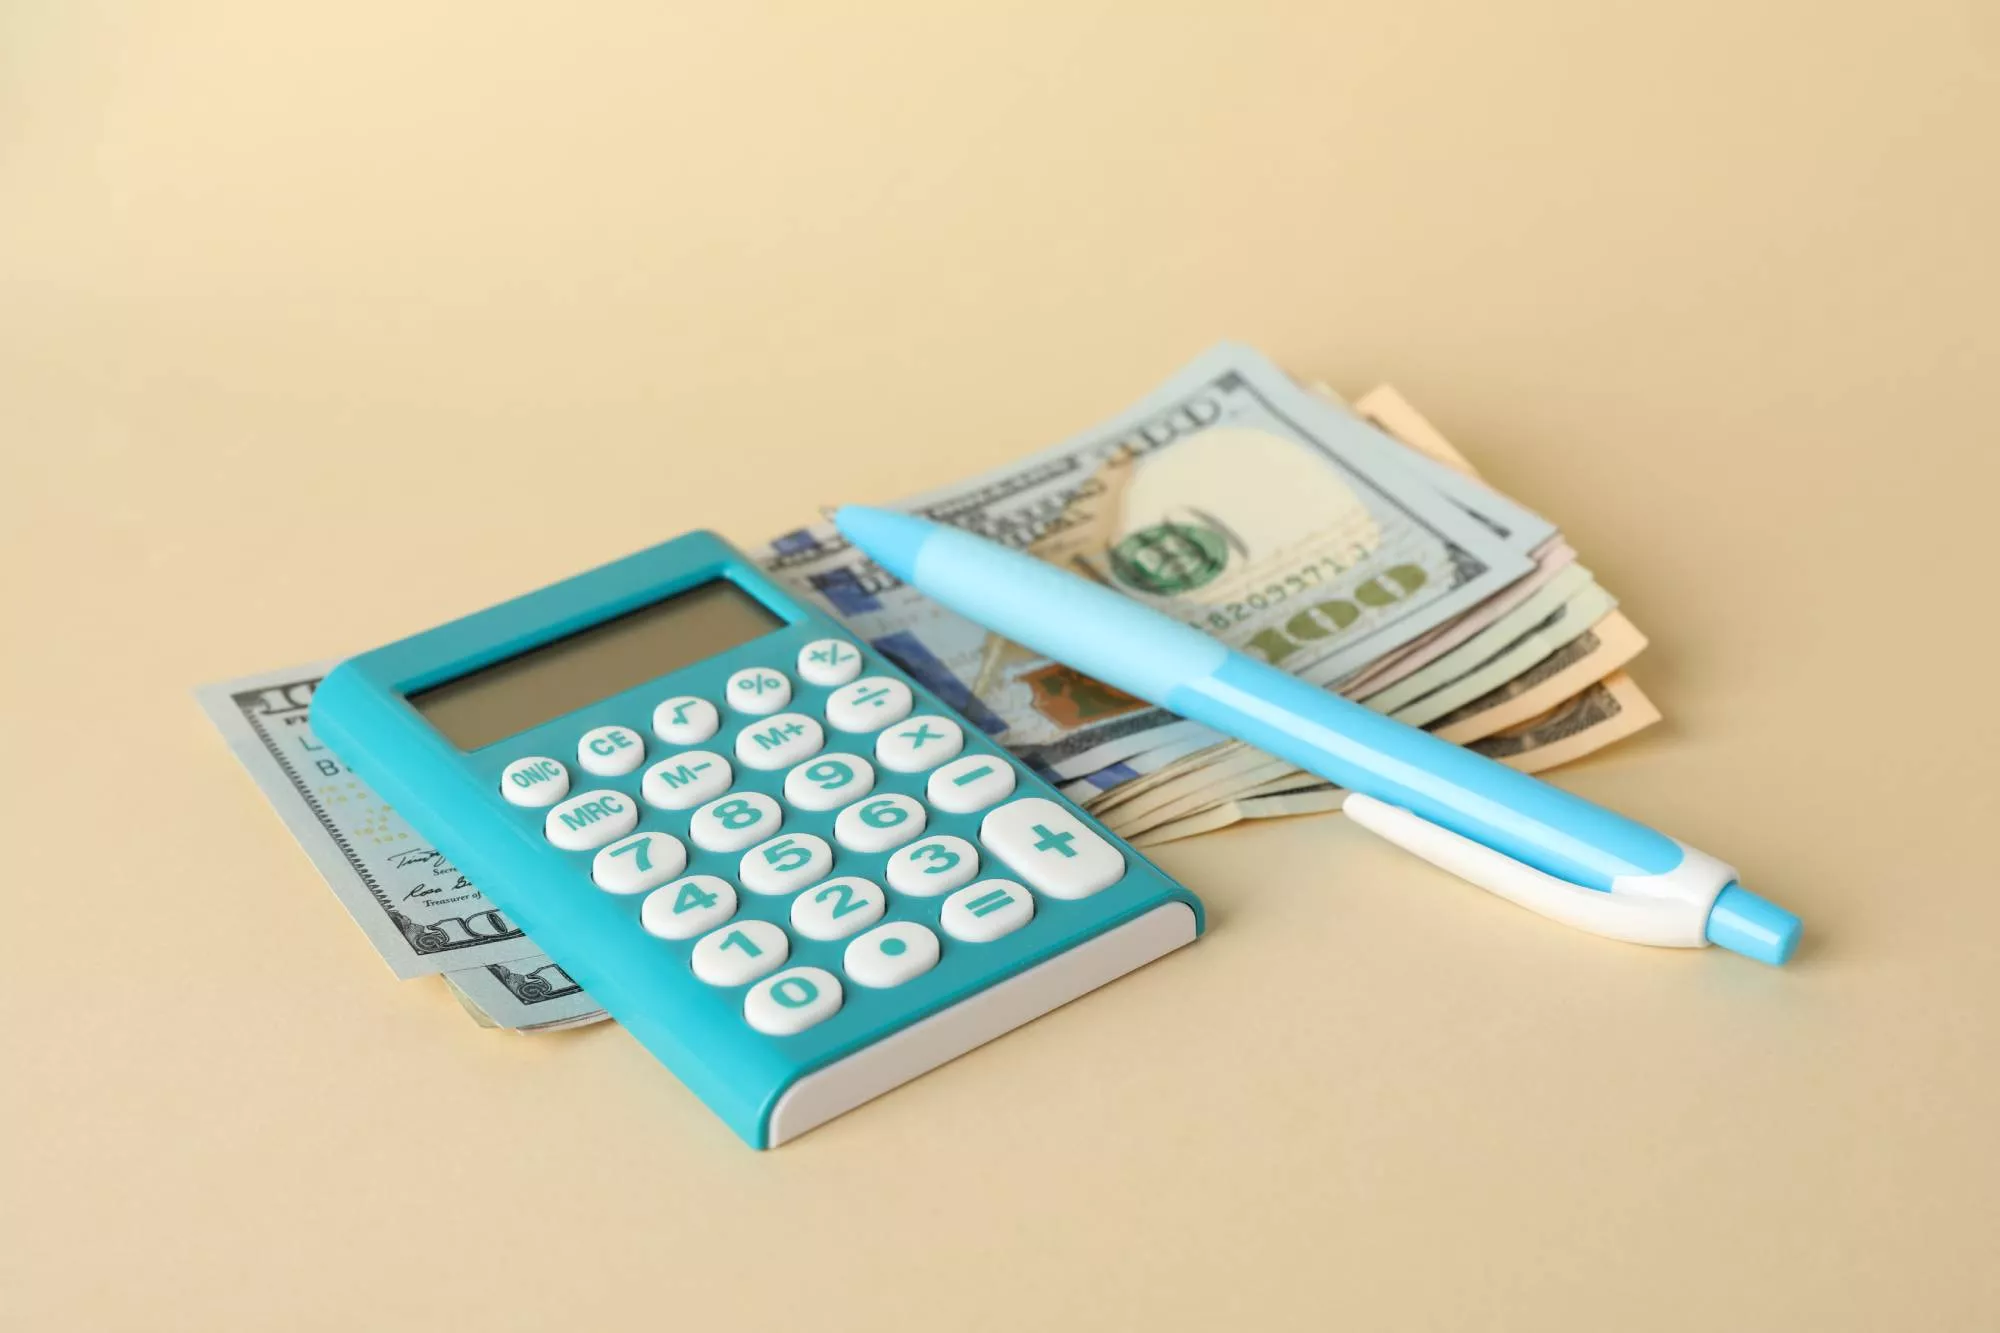 A calculator being used as a business expense tracker on top of a stack of money and next to a pen